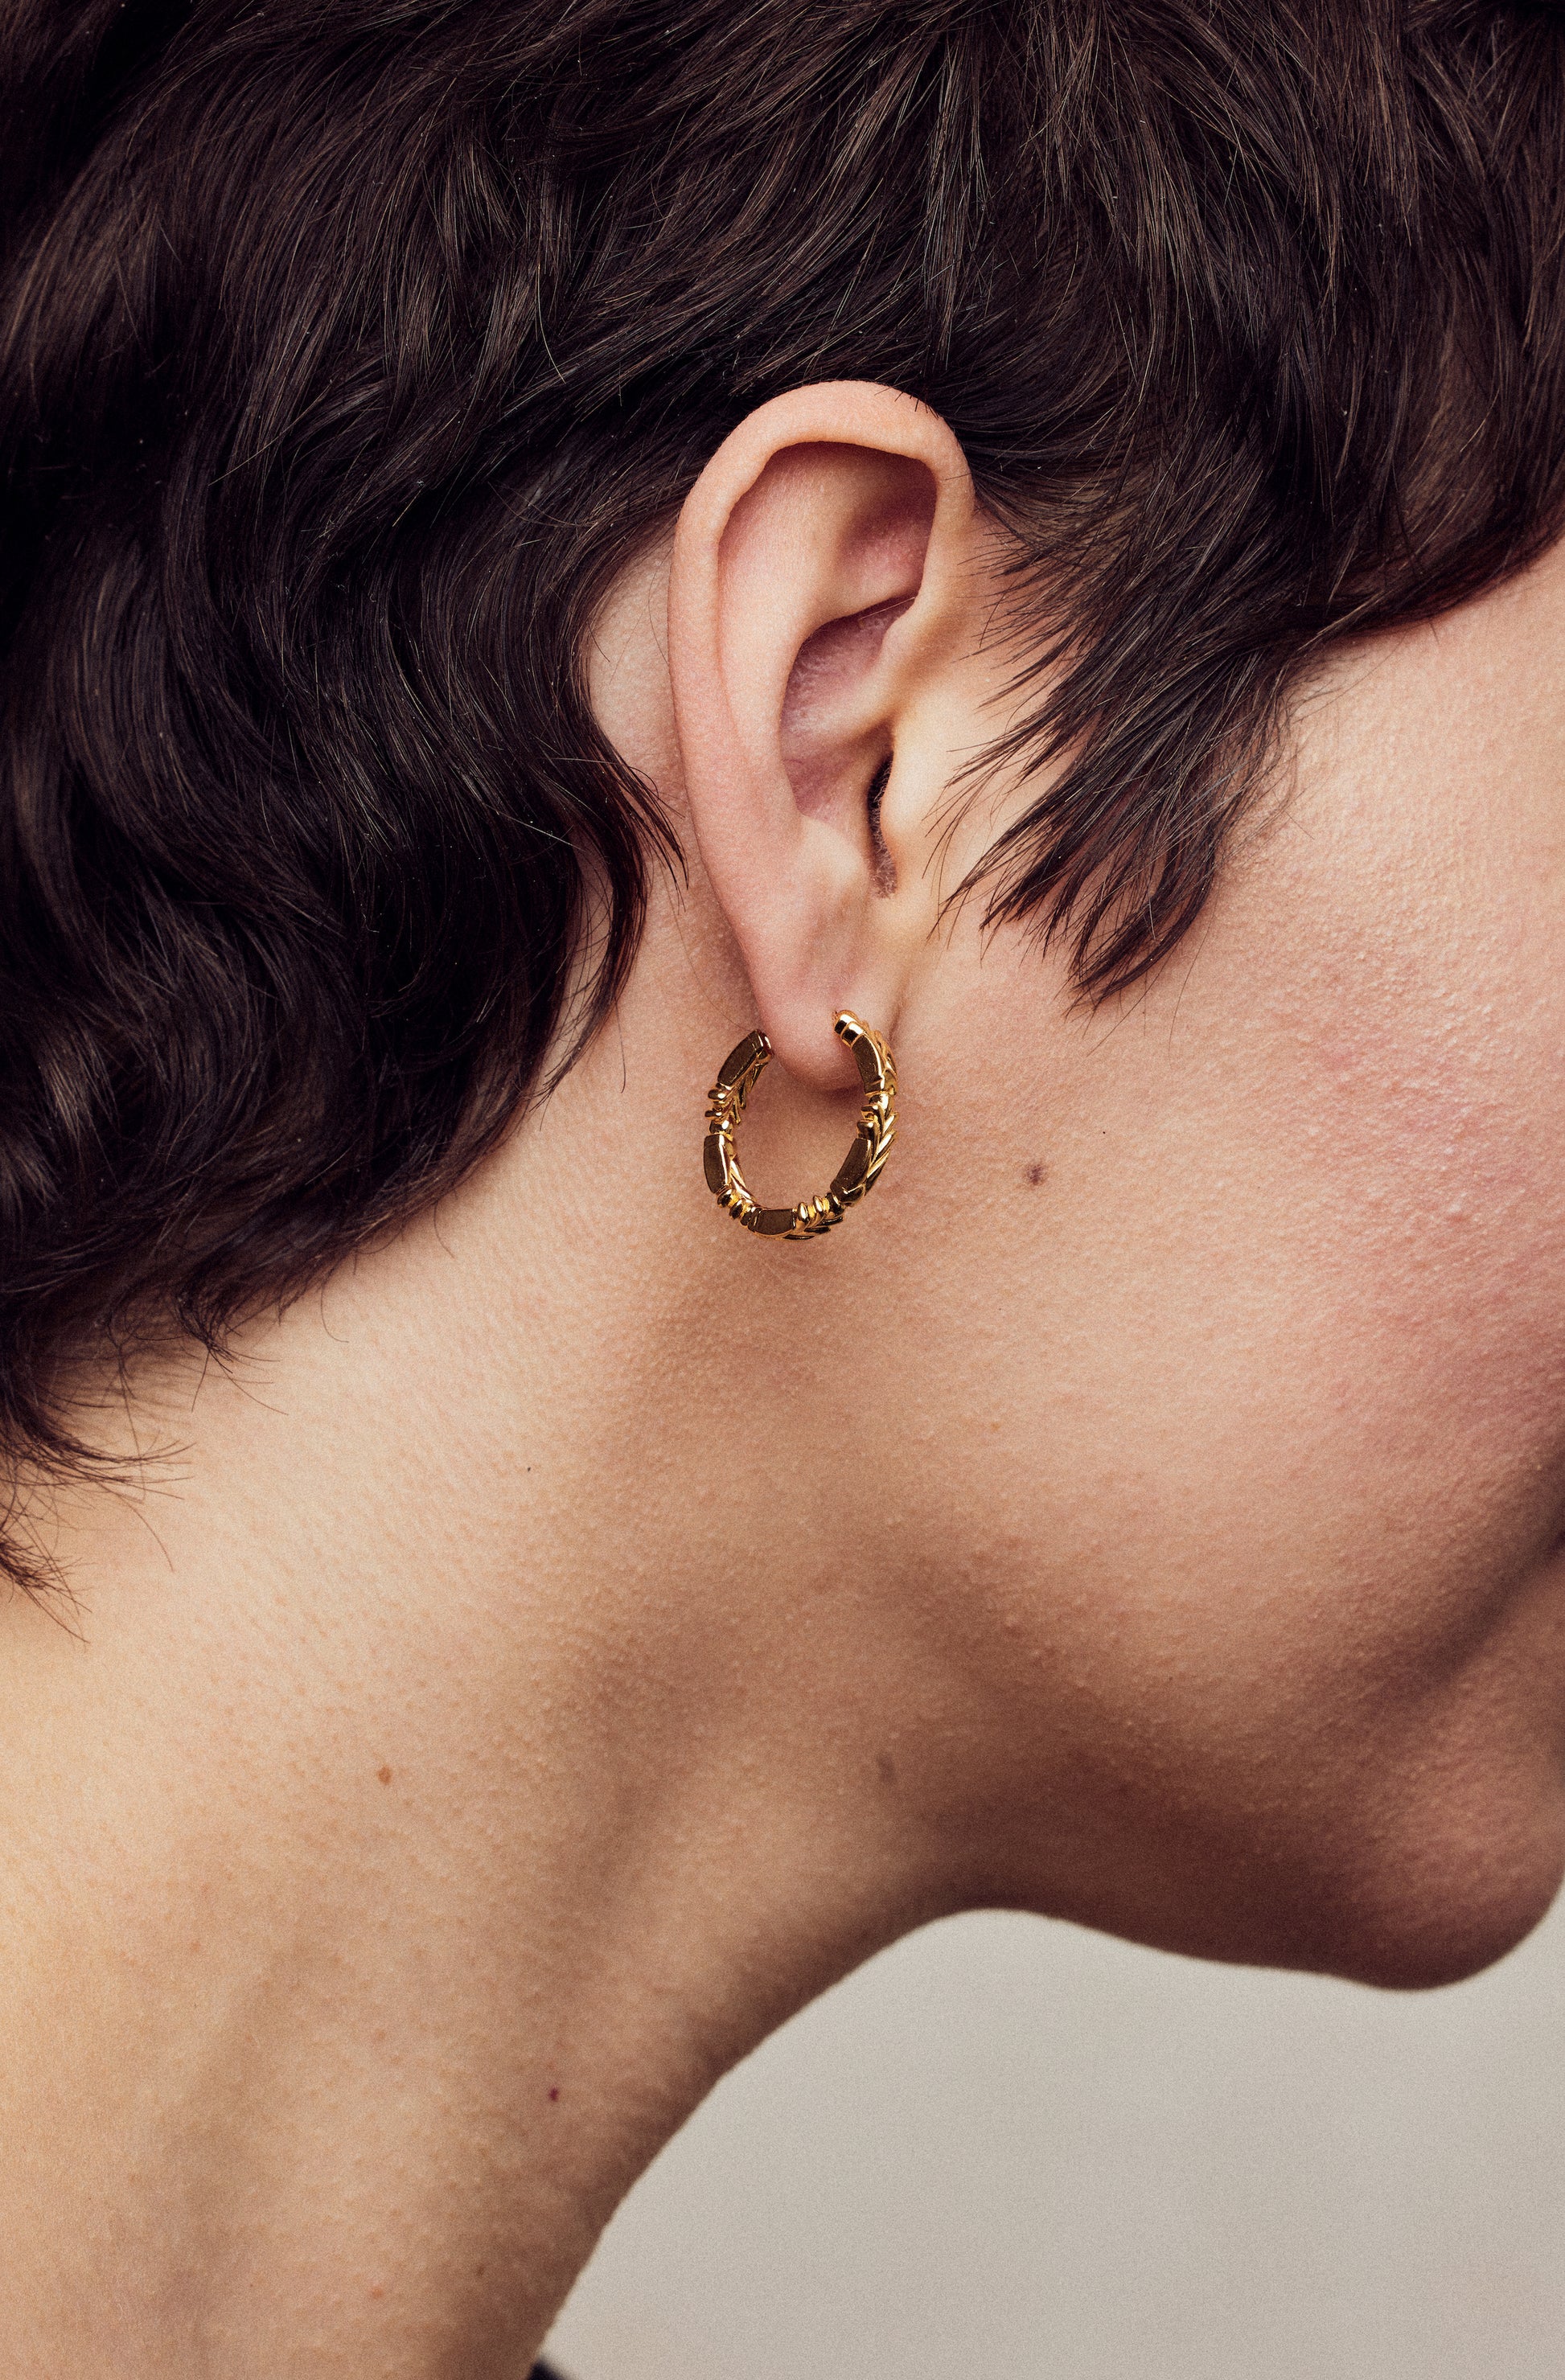 image of medium firework gold hoop earrings close up on ear on model with short brown hair